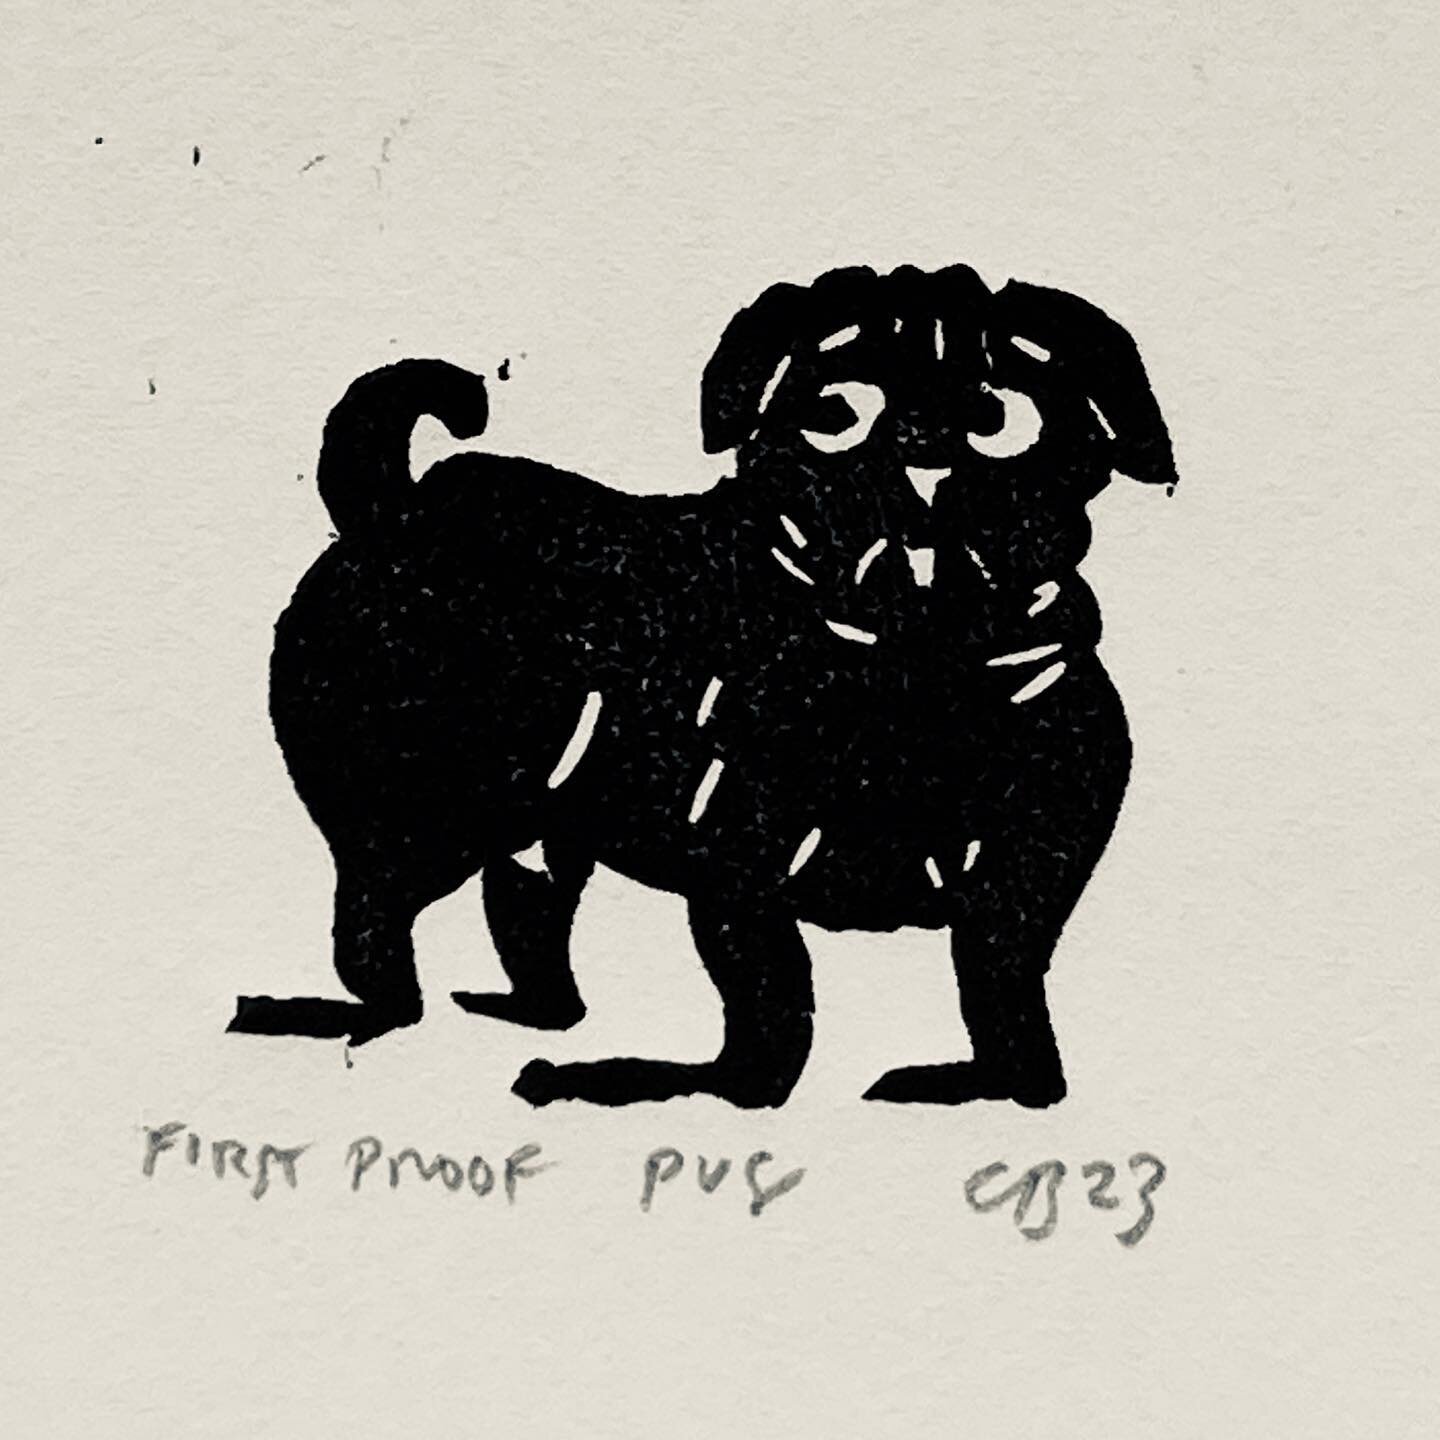 Wednesday Woof ! 🖤PUG 🖤a small Linocut by @christopherbrownlino . 🖤Image Size: 3.5 x 4 Paper Size: 19 x 13.5 🖤Unframed Artists First Proof Available on Website 🖤 #pug #blackpug #blackpugsofinstagram #puglove #pugdog #puglovers #christopherbrownl